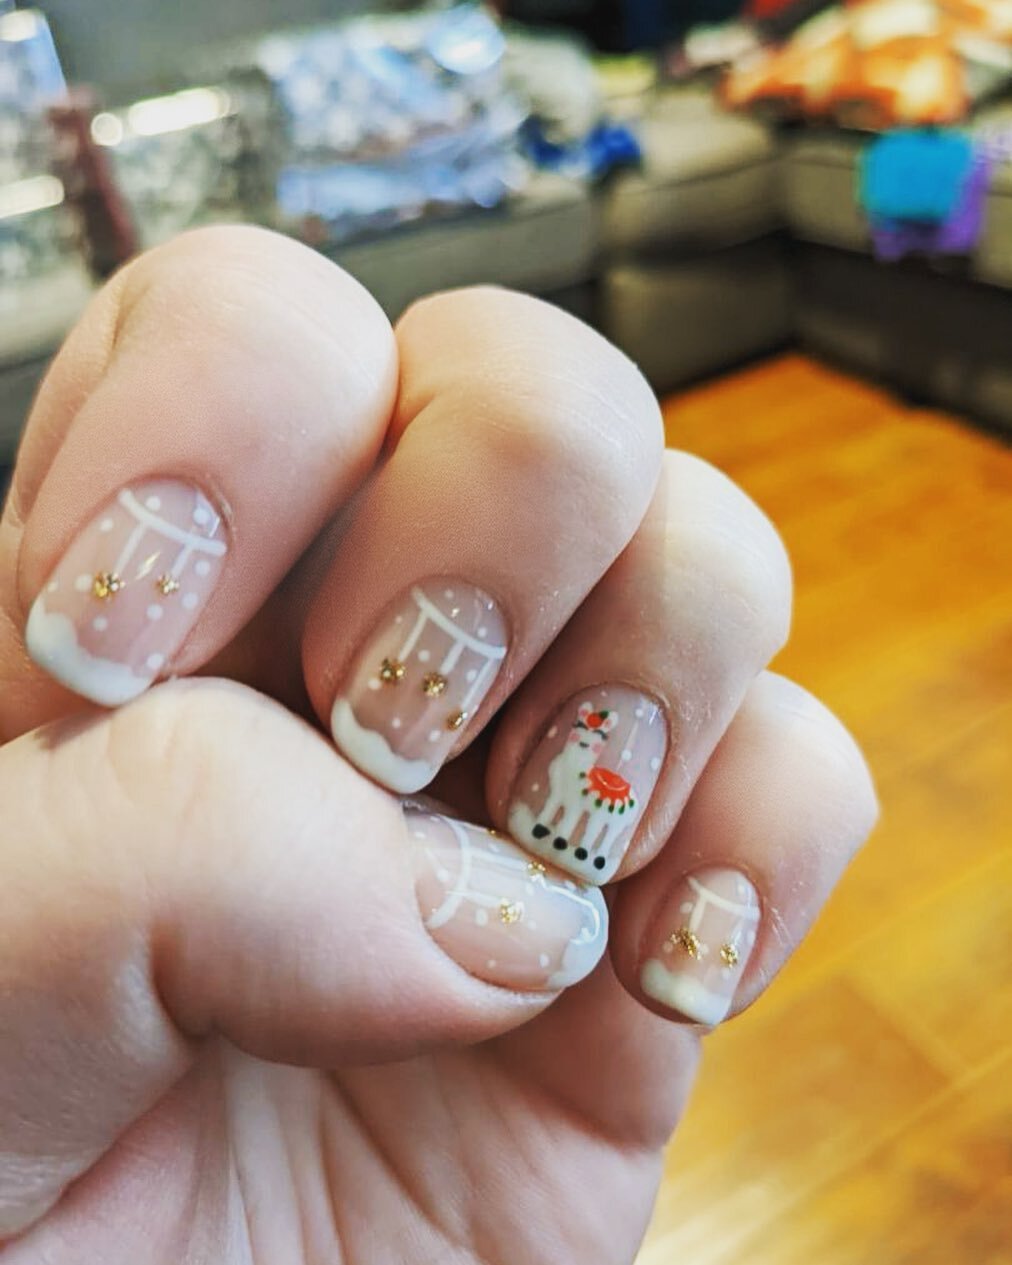 Happy Holidays! Polly out here creating holiday cheers with holiday designs! How cuttttteeee is this Christmas lama !!! Make sure you book in this week for New Years 😊 #ygq  #windsornailsalon #oceandayspa #christmasnaildesign #lama